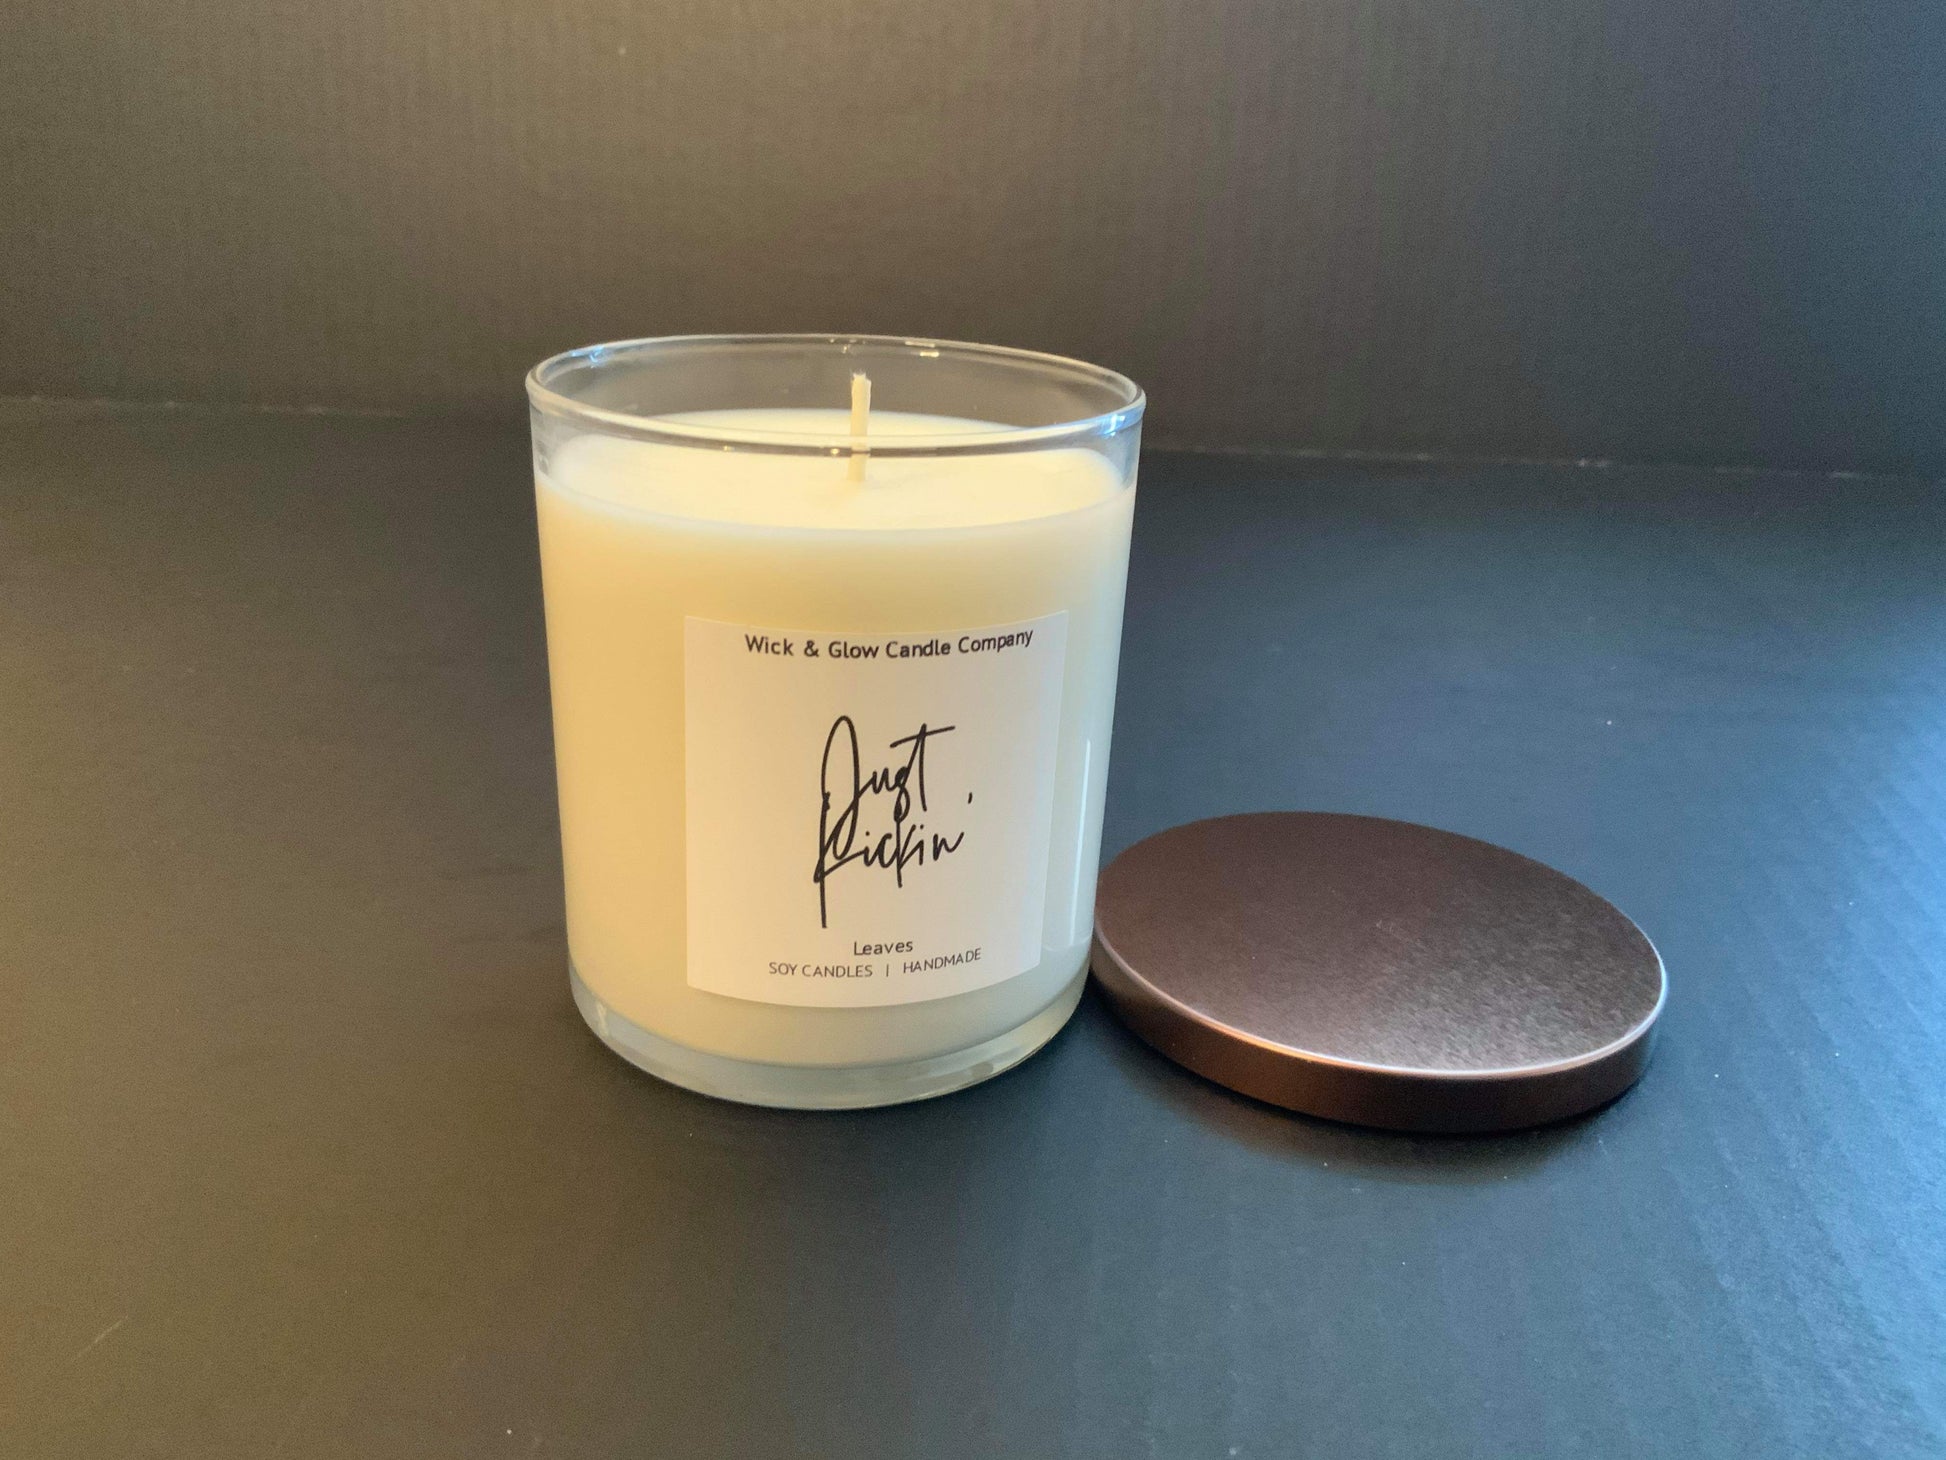 Just Kickin' -Fresh Leaves Luxury Scented Candle - The Wick and Glow Candle Company